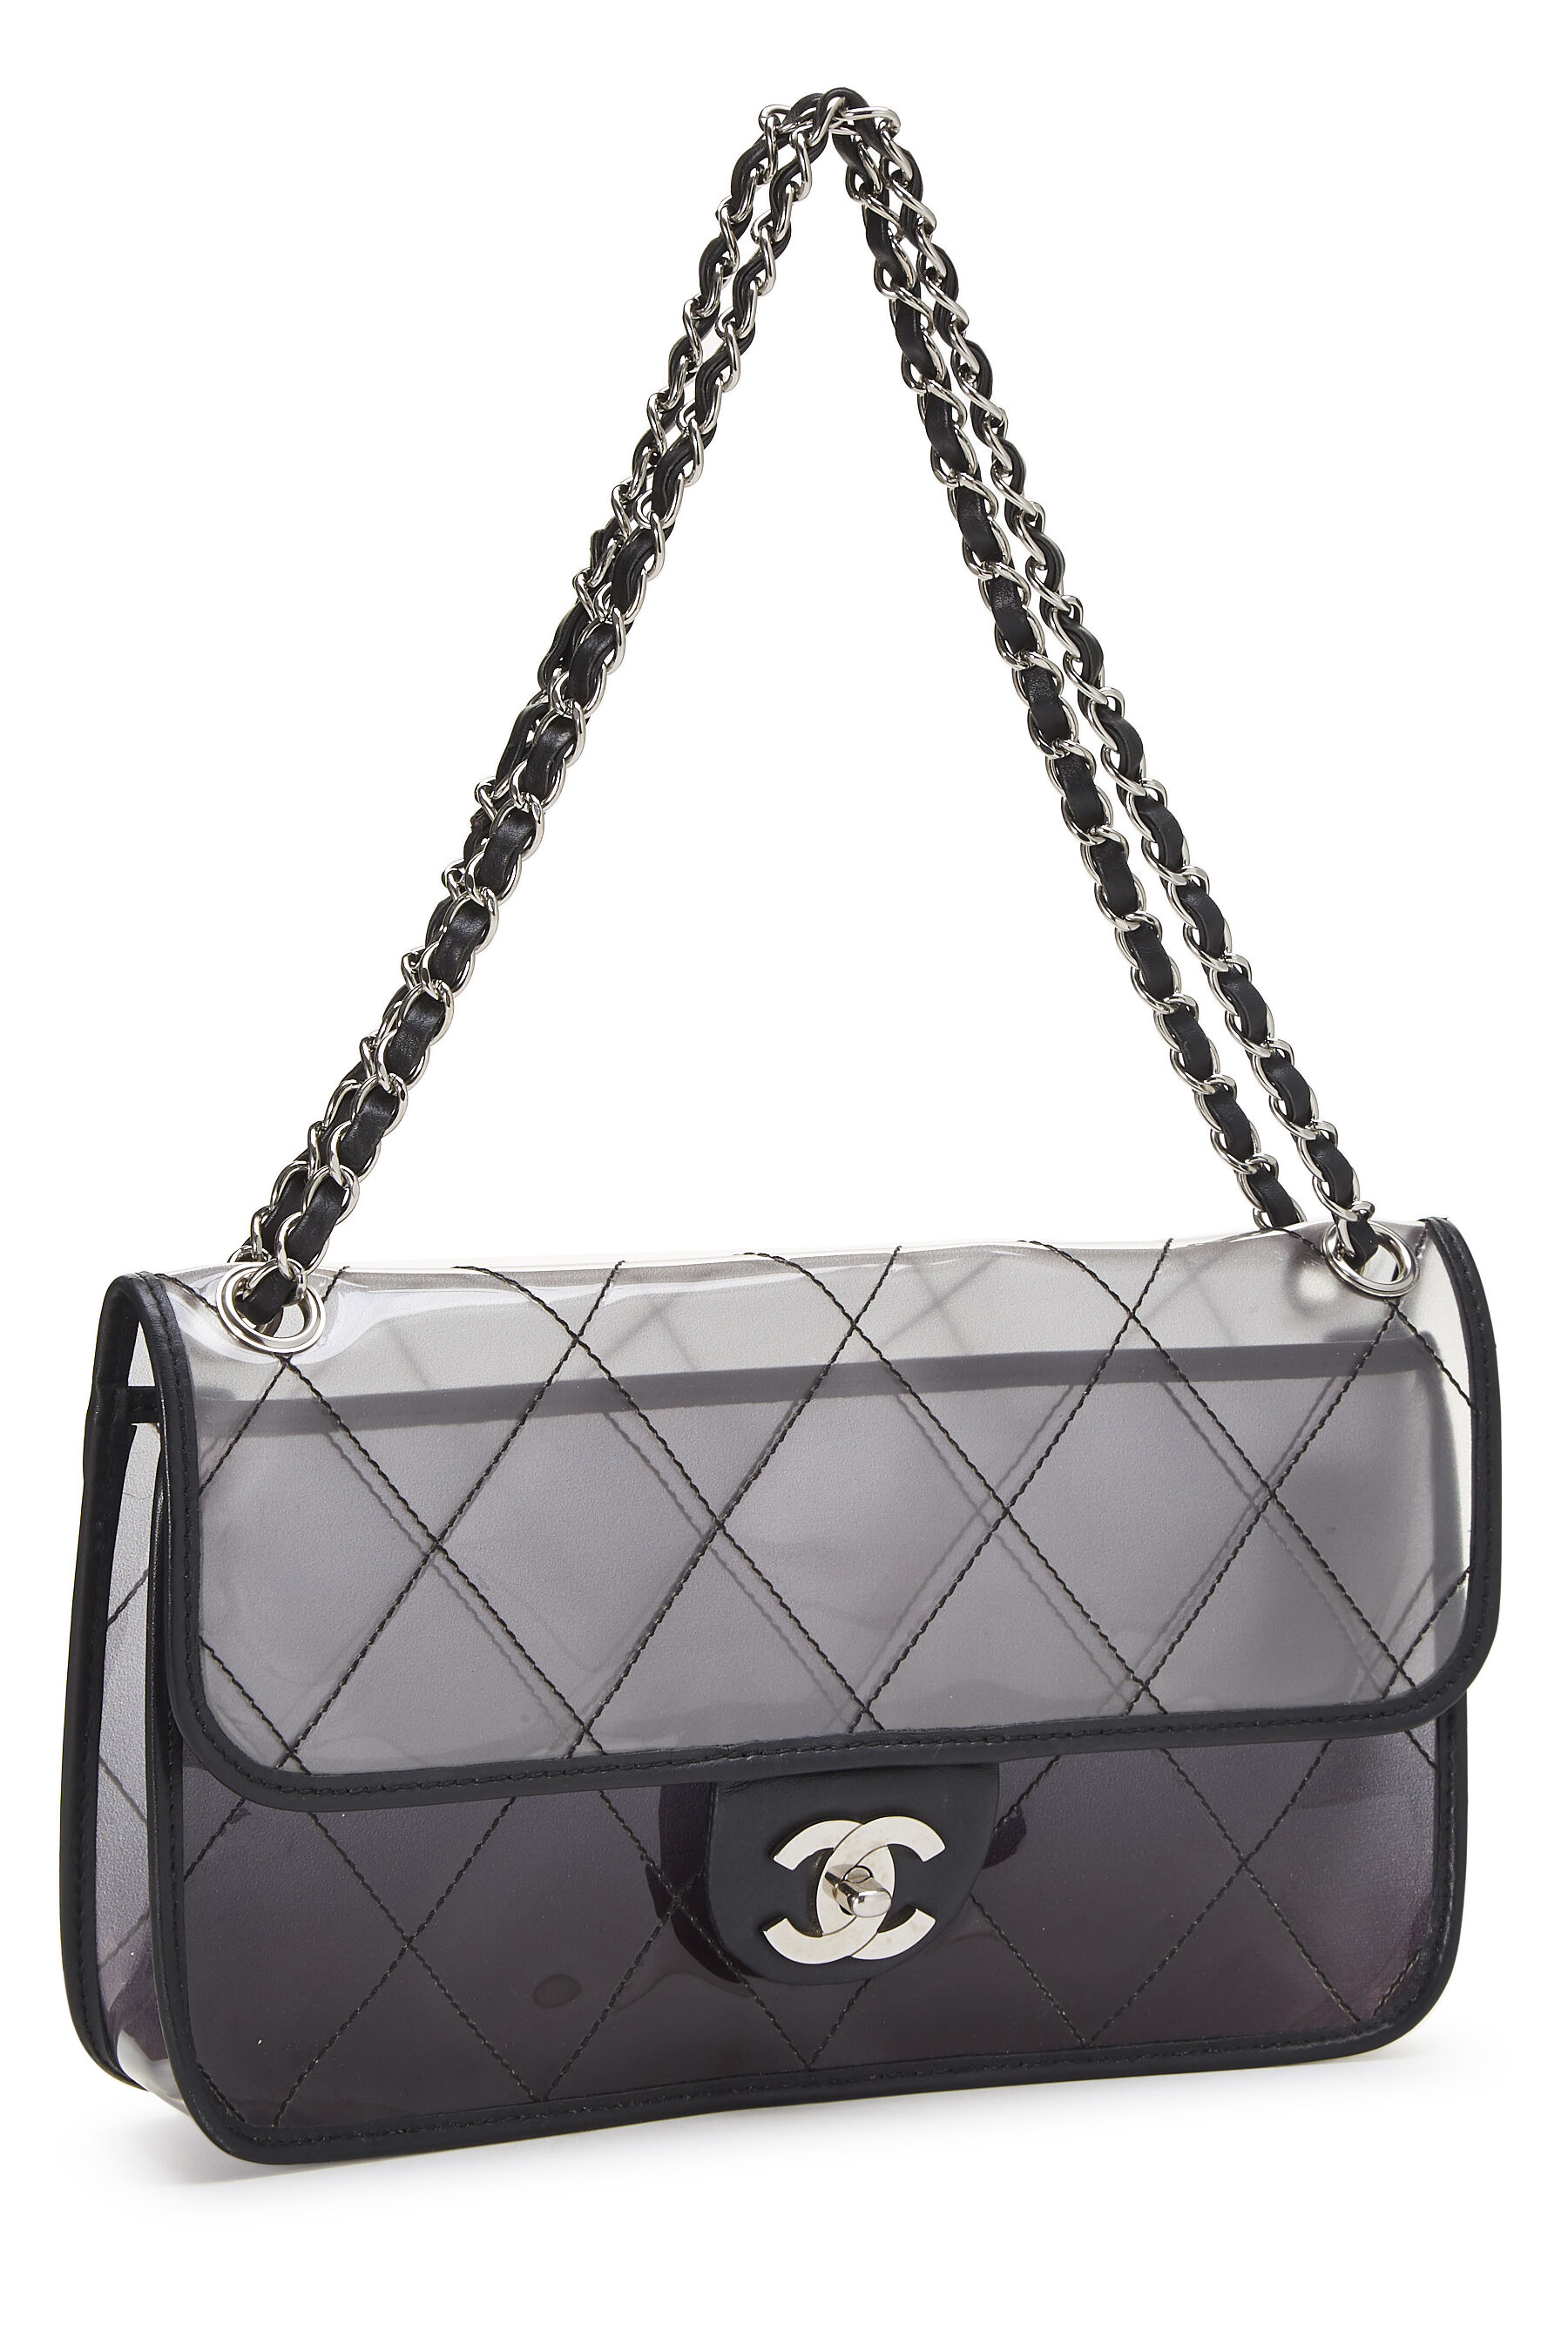 CHANEL Vinyl Quilted Melrose Degrade Jumbo Flap, FASHIONPHILE